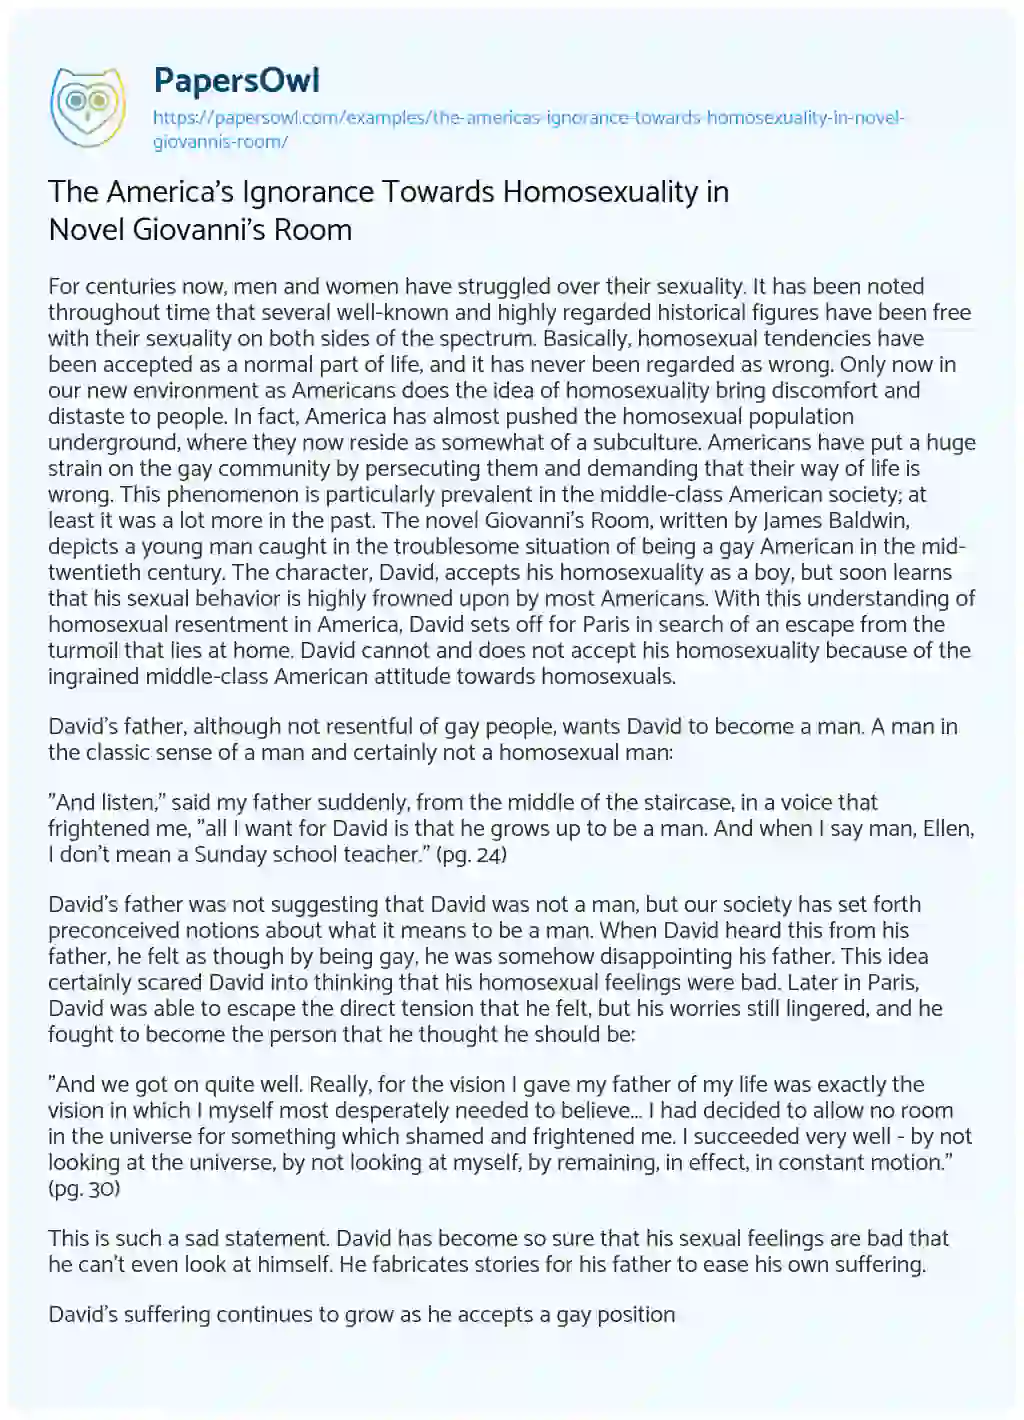 Essay on The America’s Ignorance Towards Homosexuality in Novel Giovanni’s Room